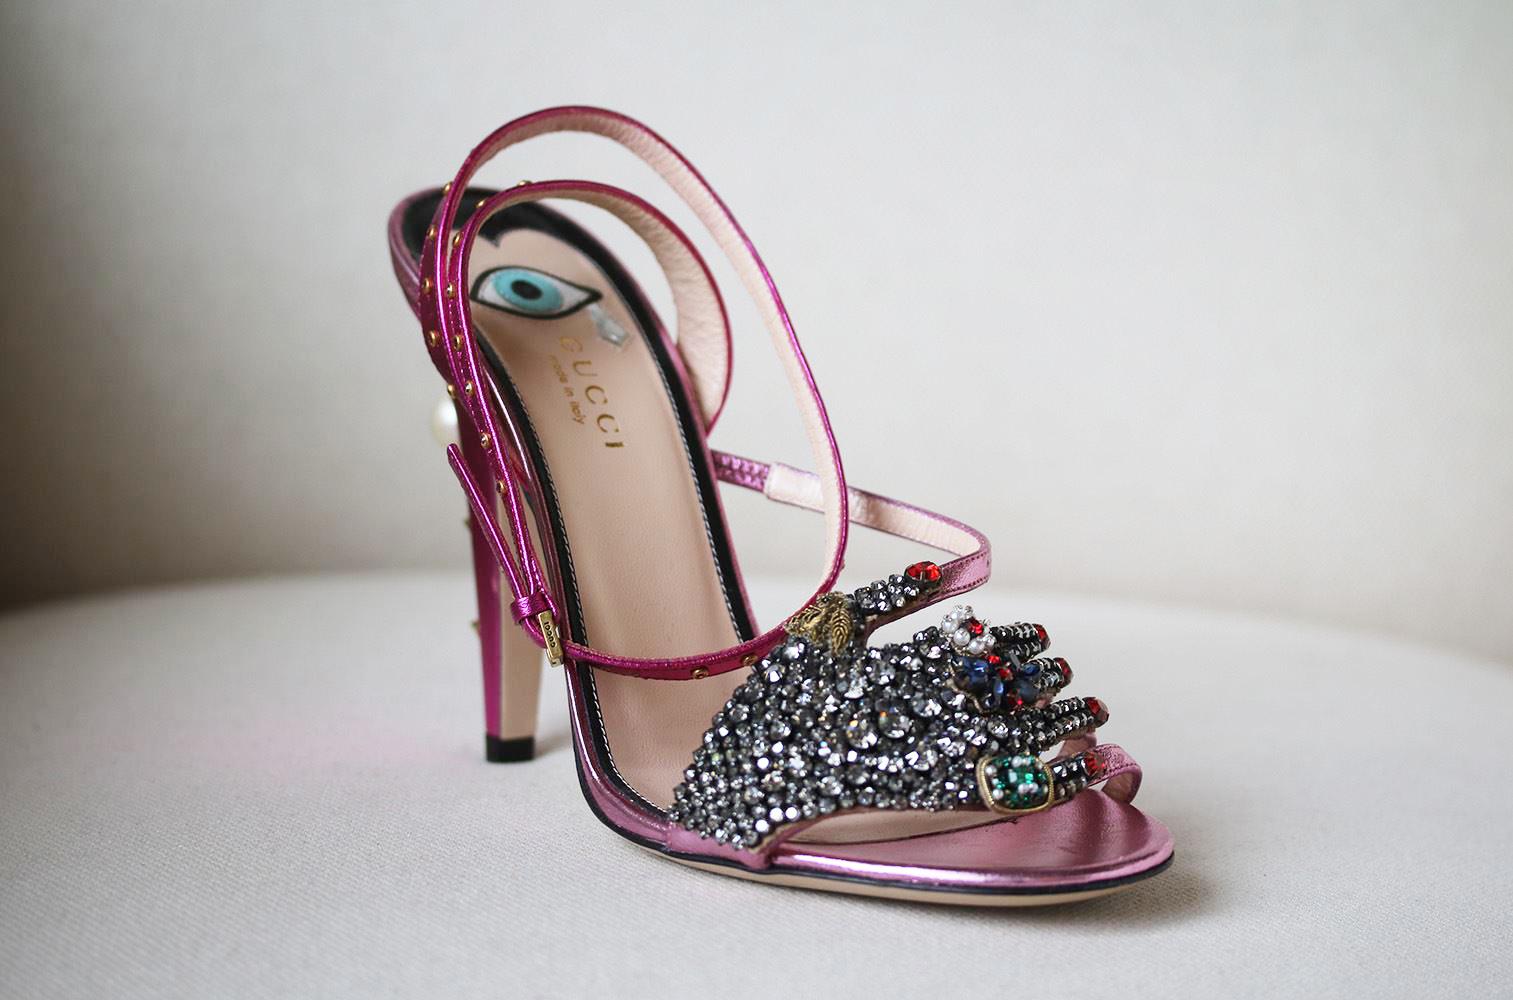 Gucci's metallic fuschia and light-pink leather sandals are pierced with 'GG'-embellished Swarovski pearls and gold studs at the cone heel.
This runway pair is strewn with glistening jewels along each strap, while the right shoe is adorned with a